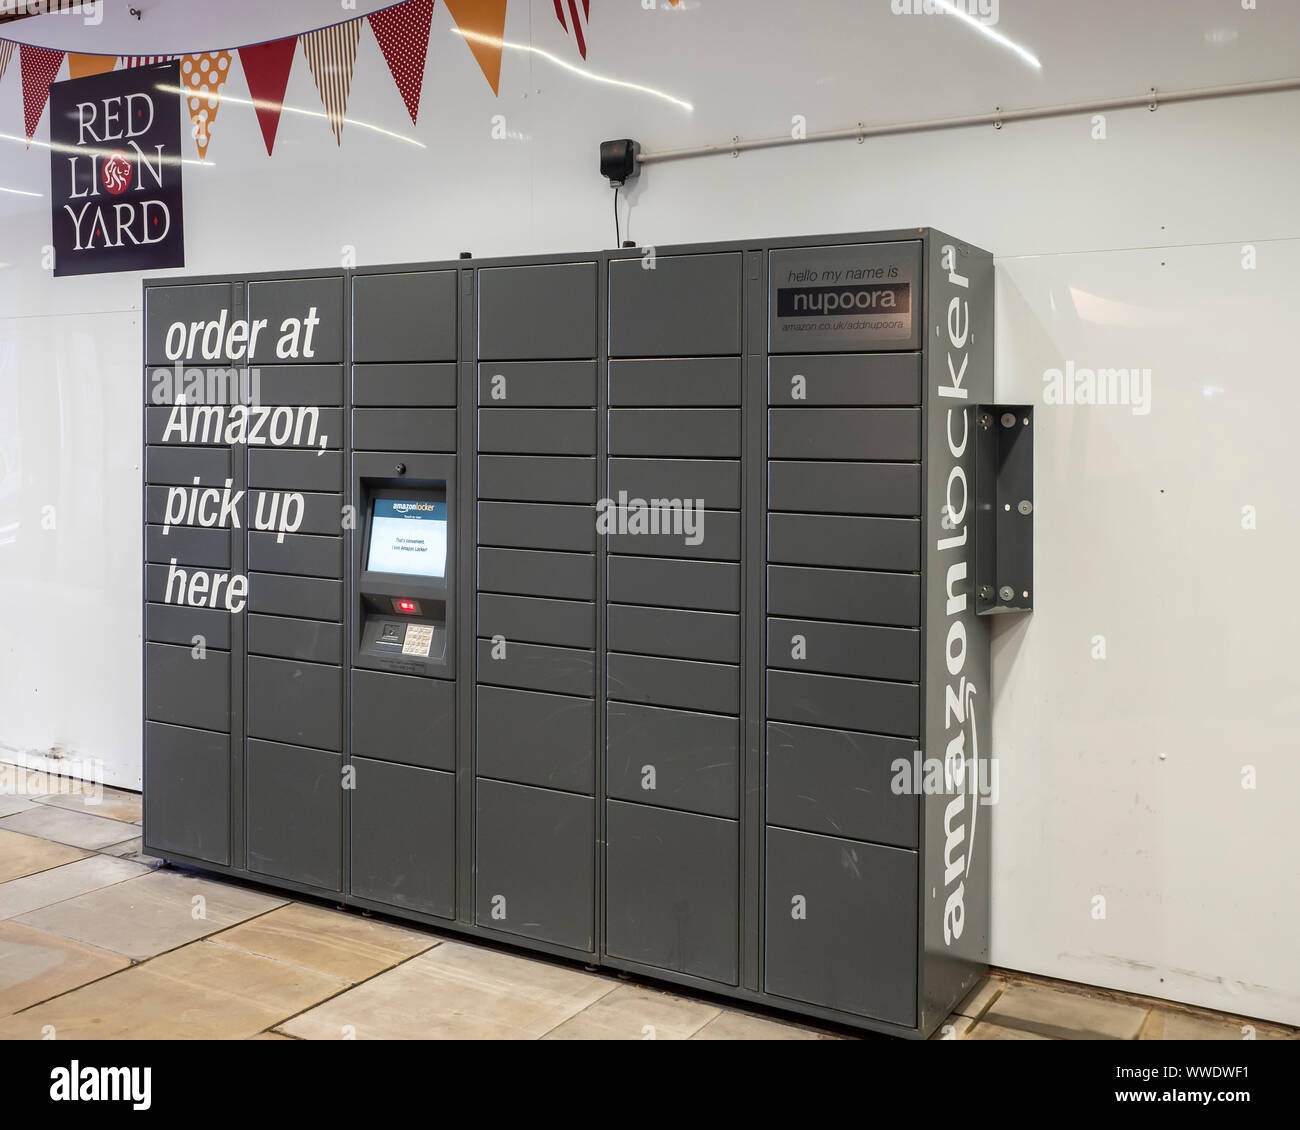 COLCHESTER, ESSEX - AUGUST 11, 2018:  Amazon Pick up Pont Locker in retail setting Stock Photo